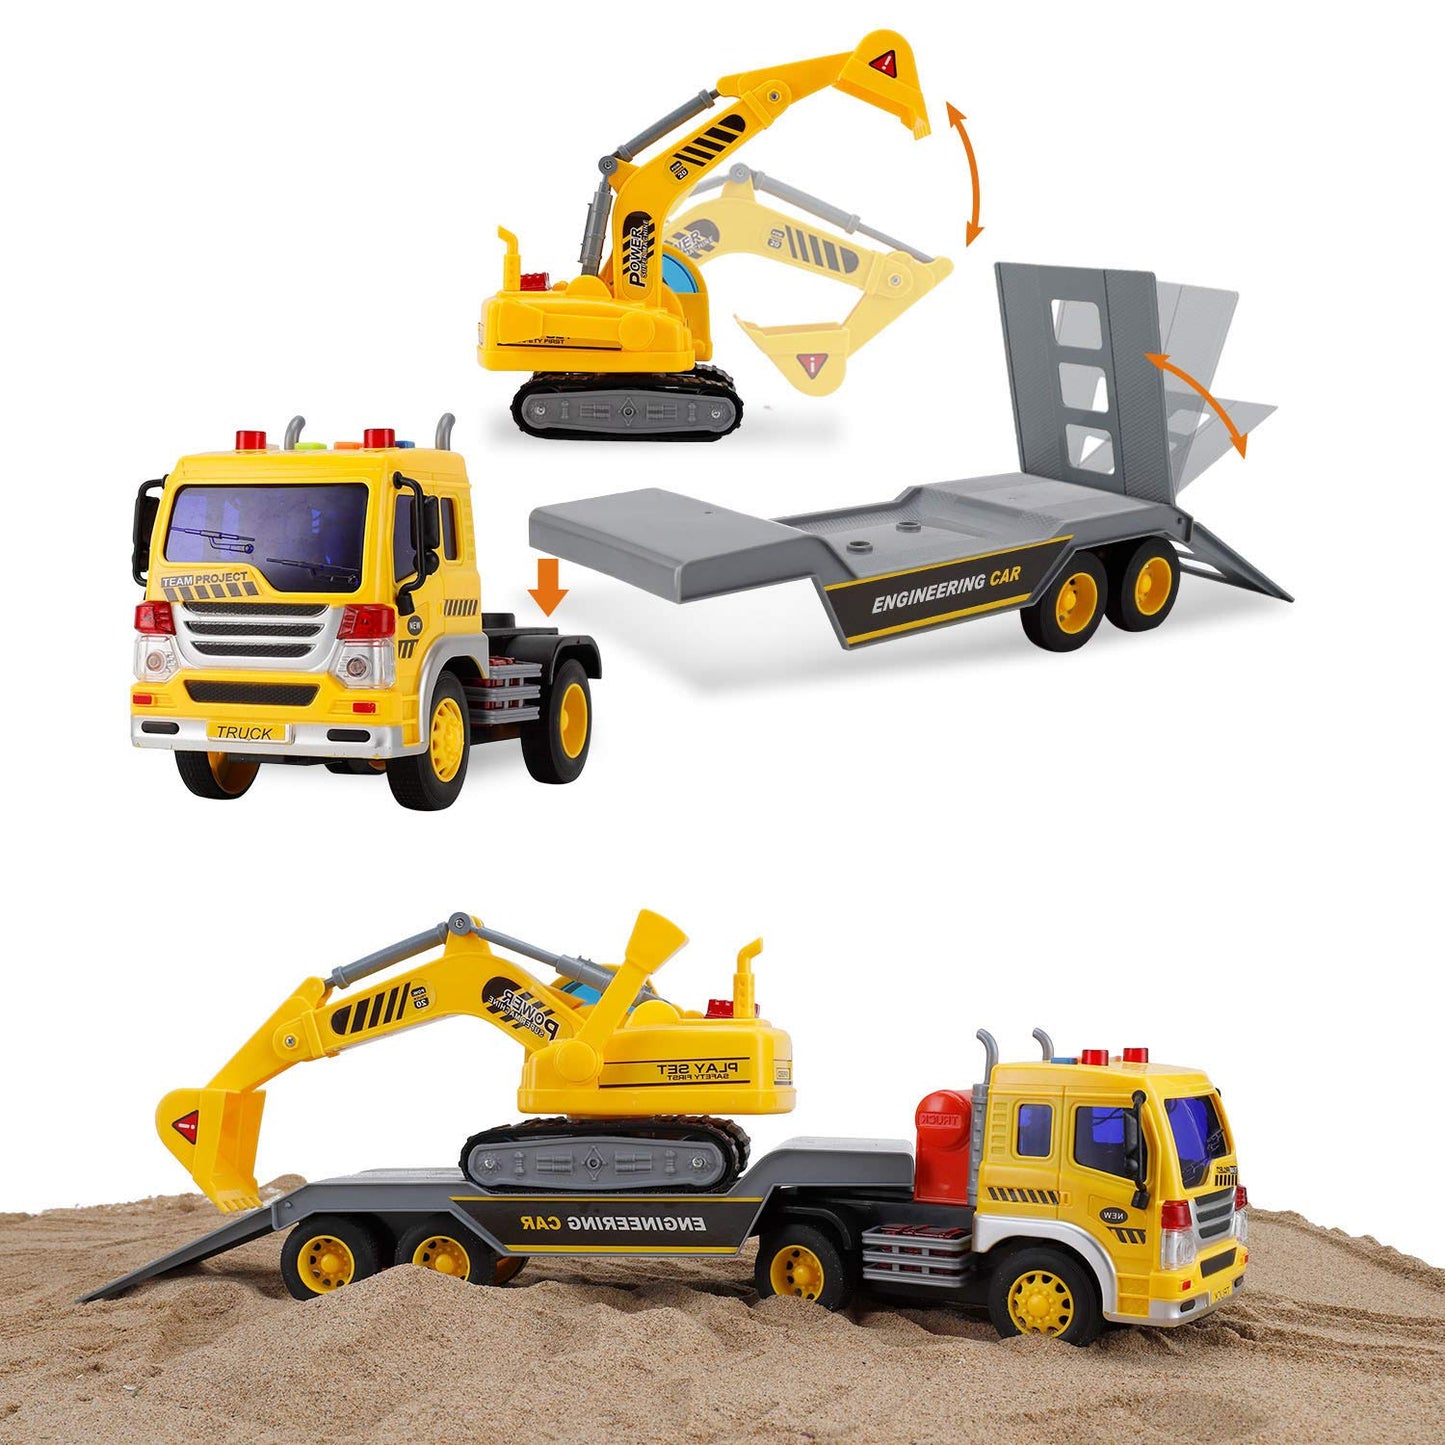 2-in-1 Friction Powered Toy Construction Truck Vehicle with Excavator with Lights and Sounds